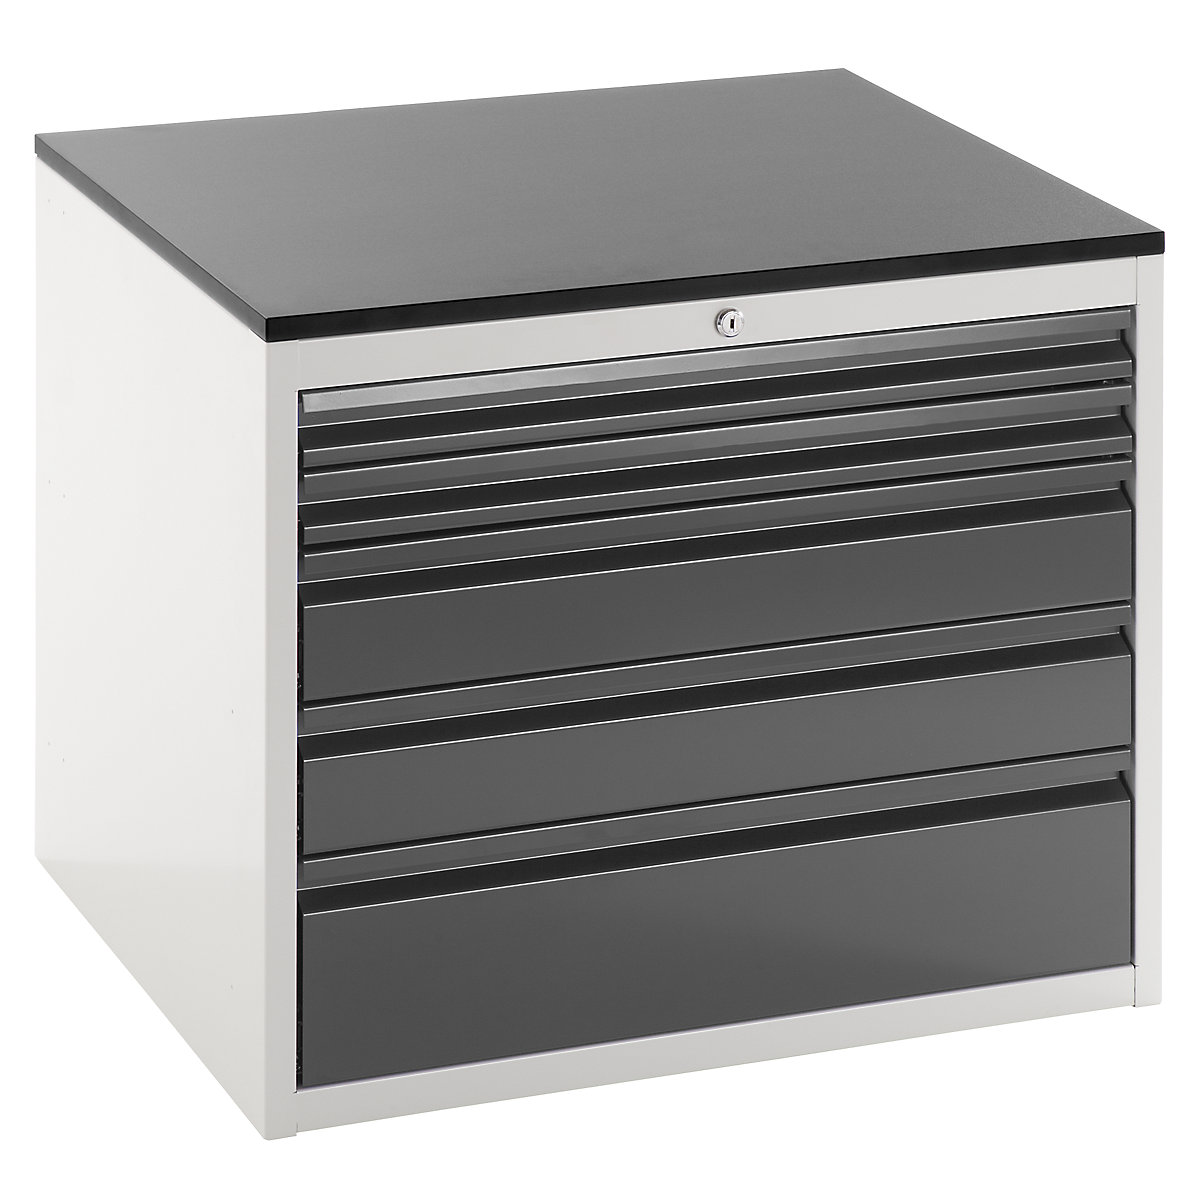 Drawer cupboard with telescopic guides – RAU, height 640 mm, drawers: 2 x 60, 2 x 120, 1 x 180 mm, light grey / charcoal, width 770 mm-5